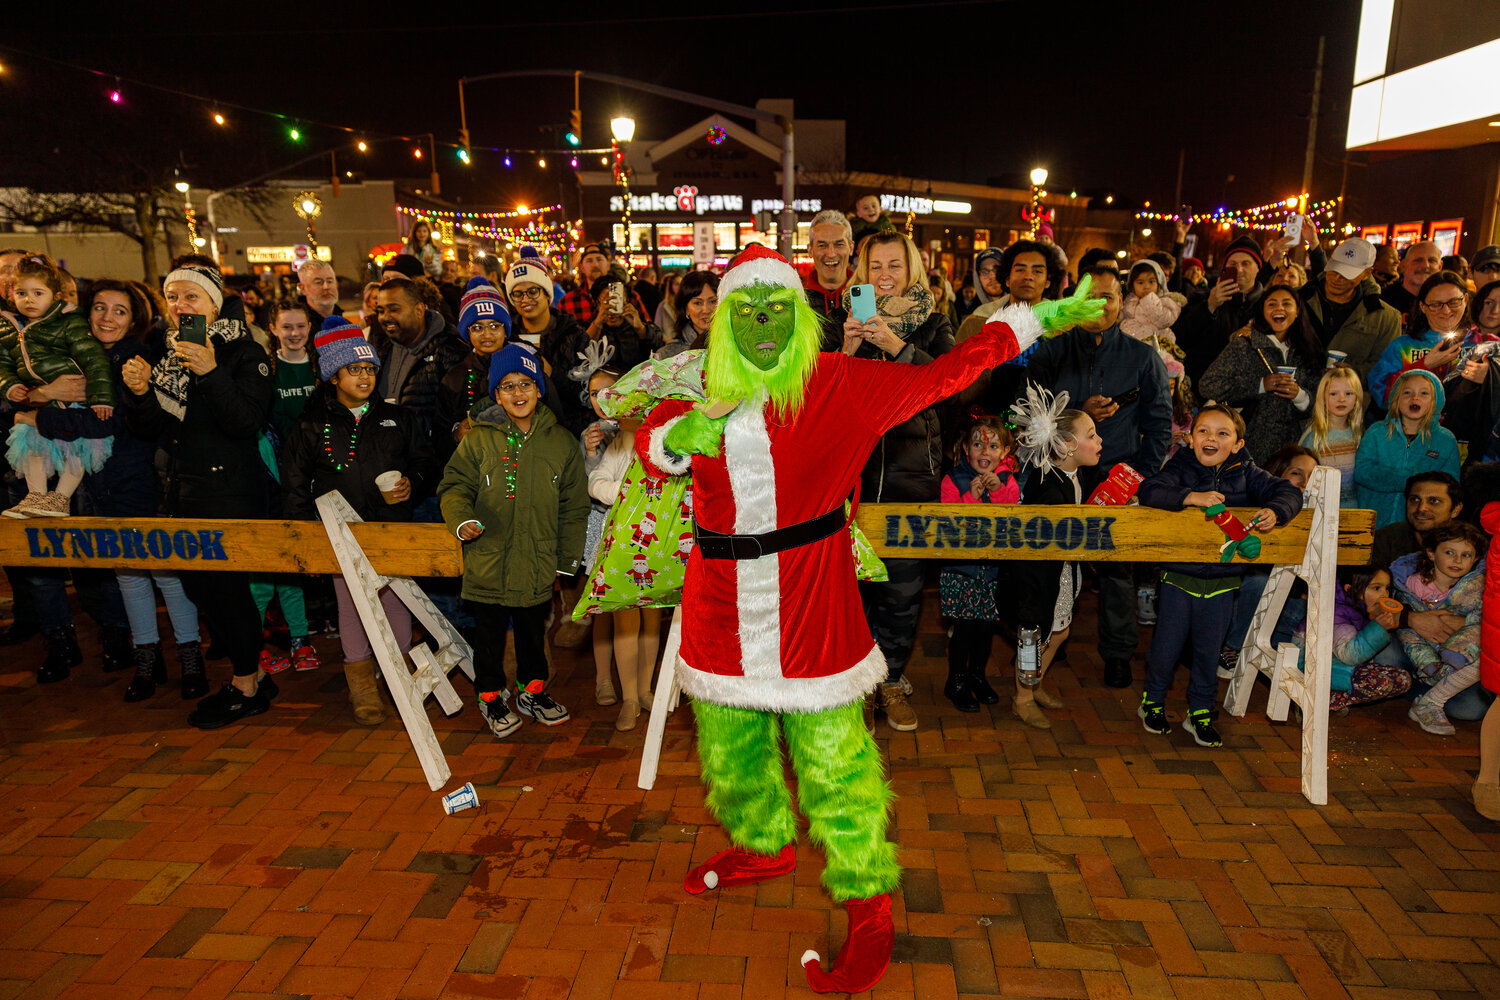 Watch out! The Grinch made an appearance during Lynbrook village’s annual tree lighting ceremony — but perhaps being around so many smiling neighbors made his heart grow three sizes that day.